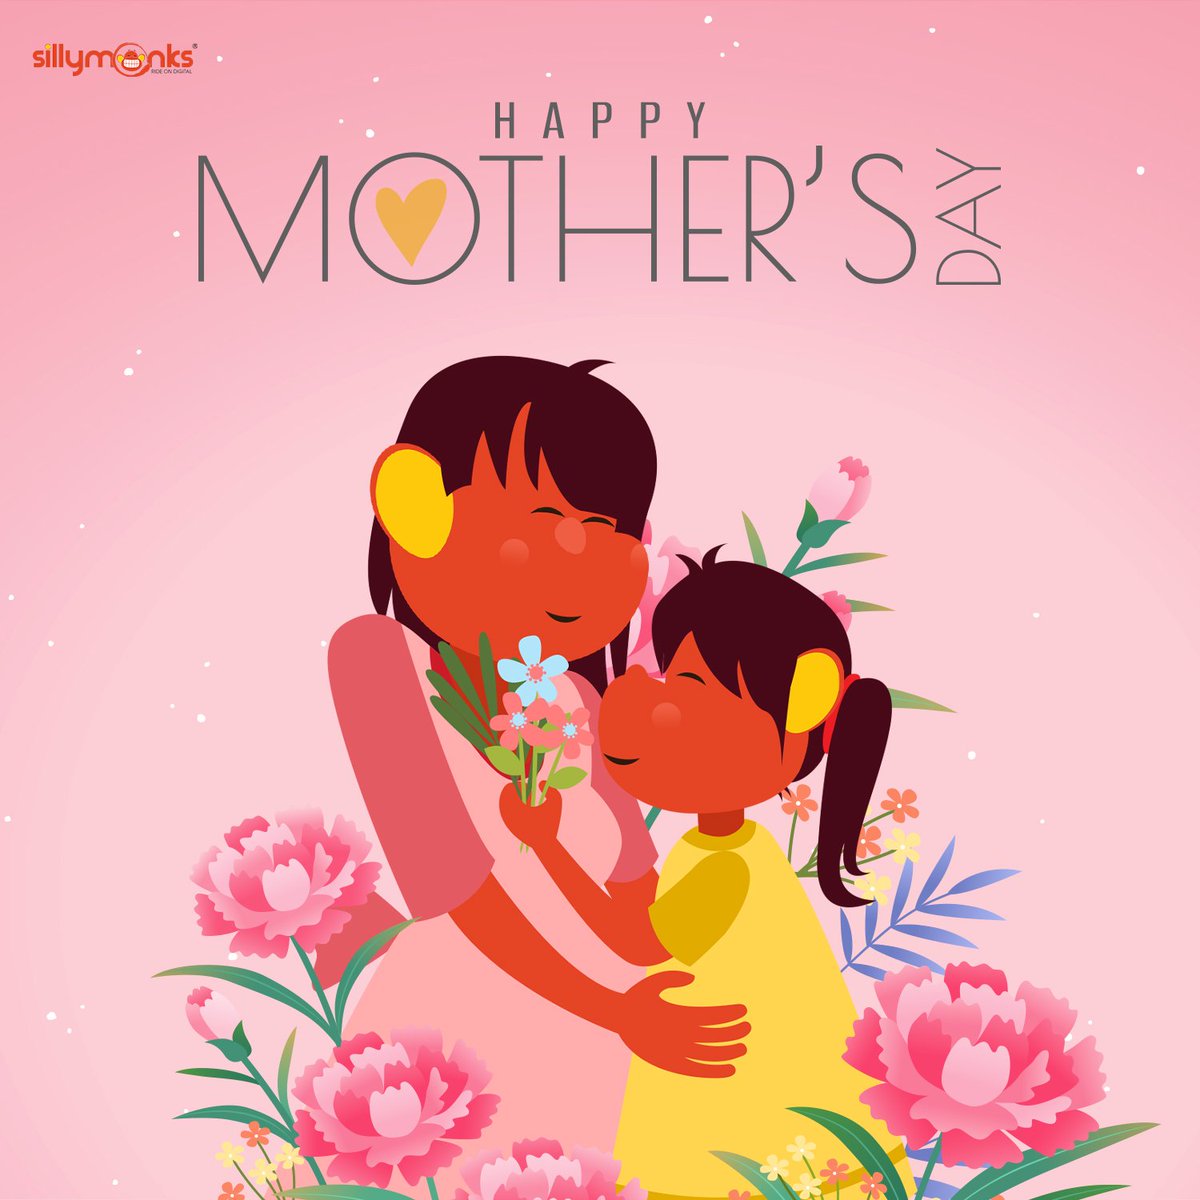 To the one who lights up our world. Happy #MothersDay, today and everyday!❤️✨ #SillyMonks #HappyMothersDay #Mother #Maa #MothersLove